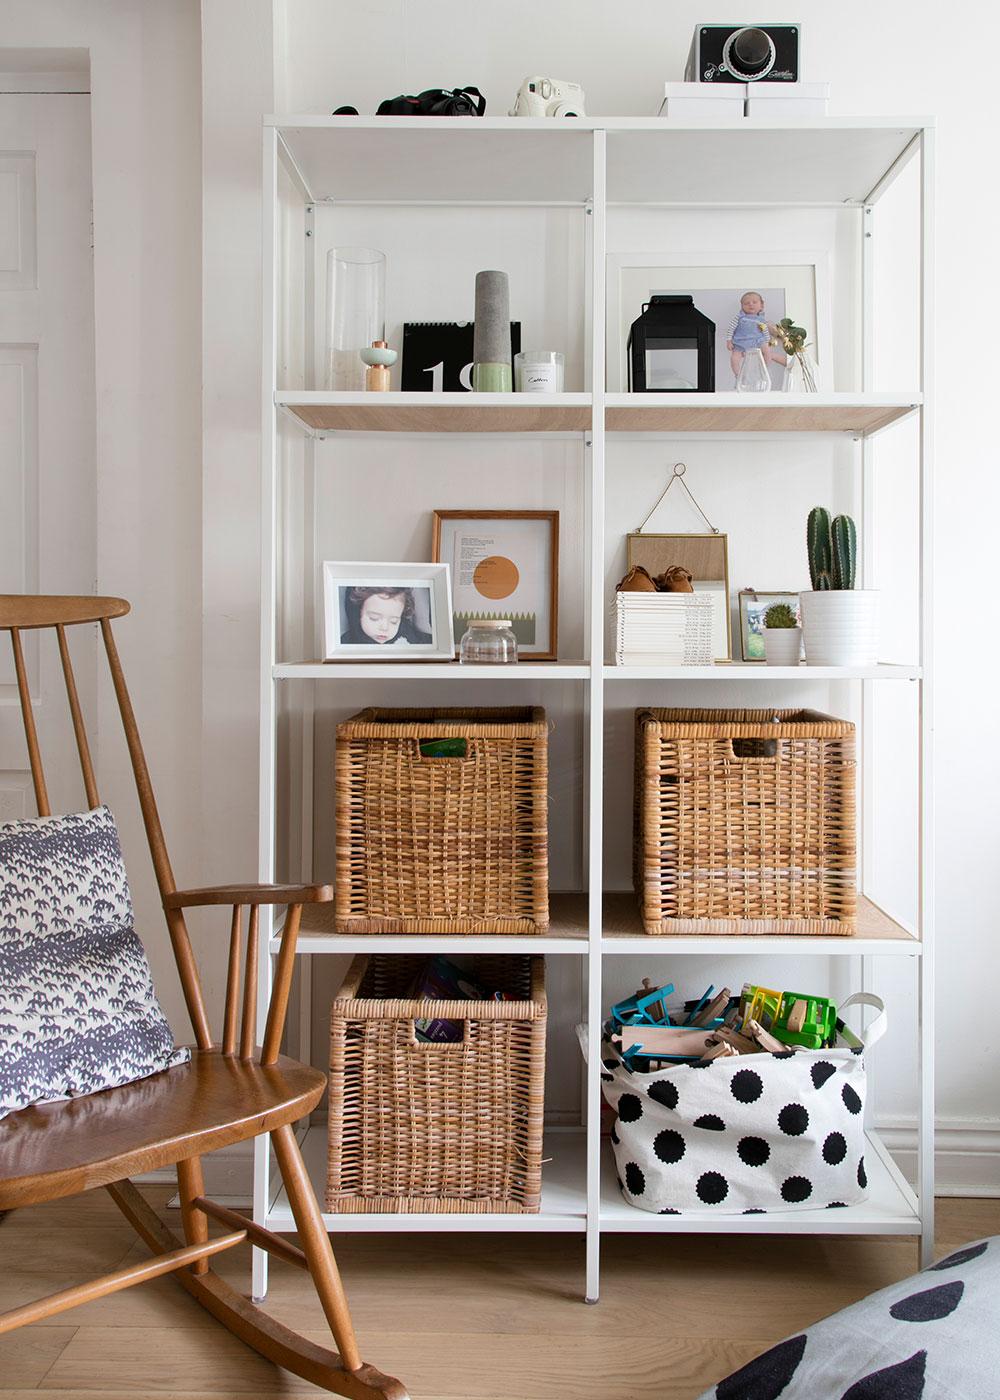 IKEA shelving hacks – 11 stylish shelving solutions for chic storage and displays 